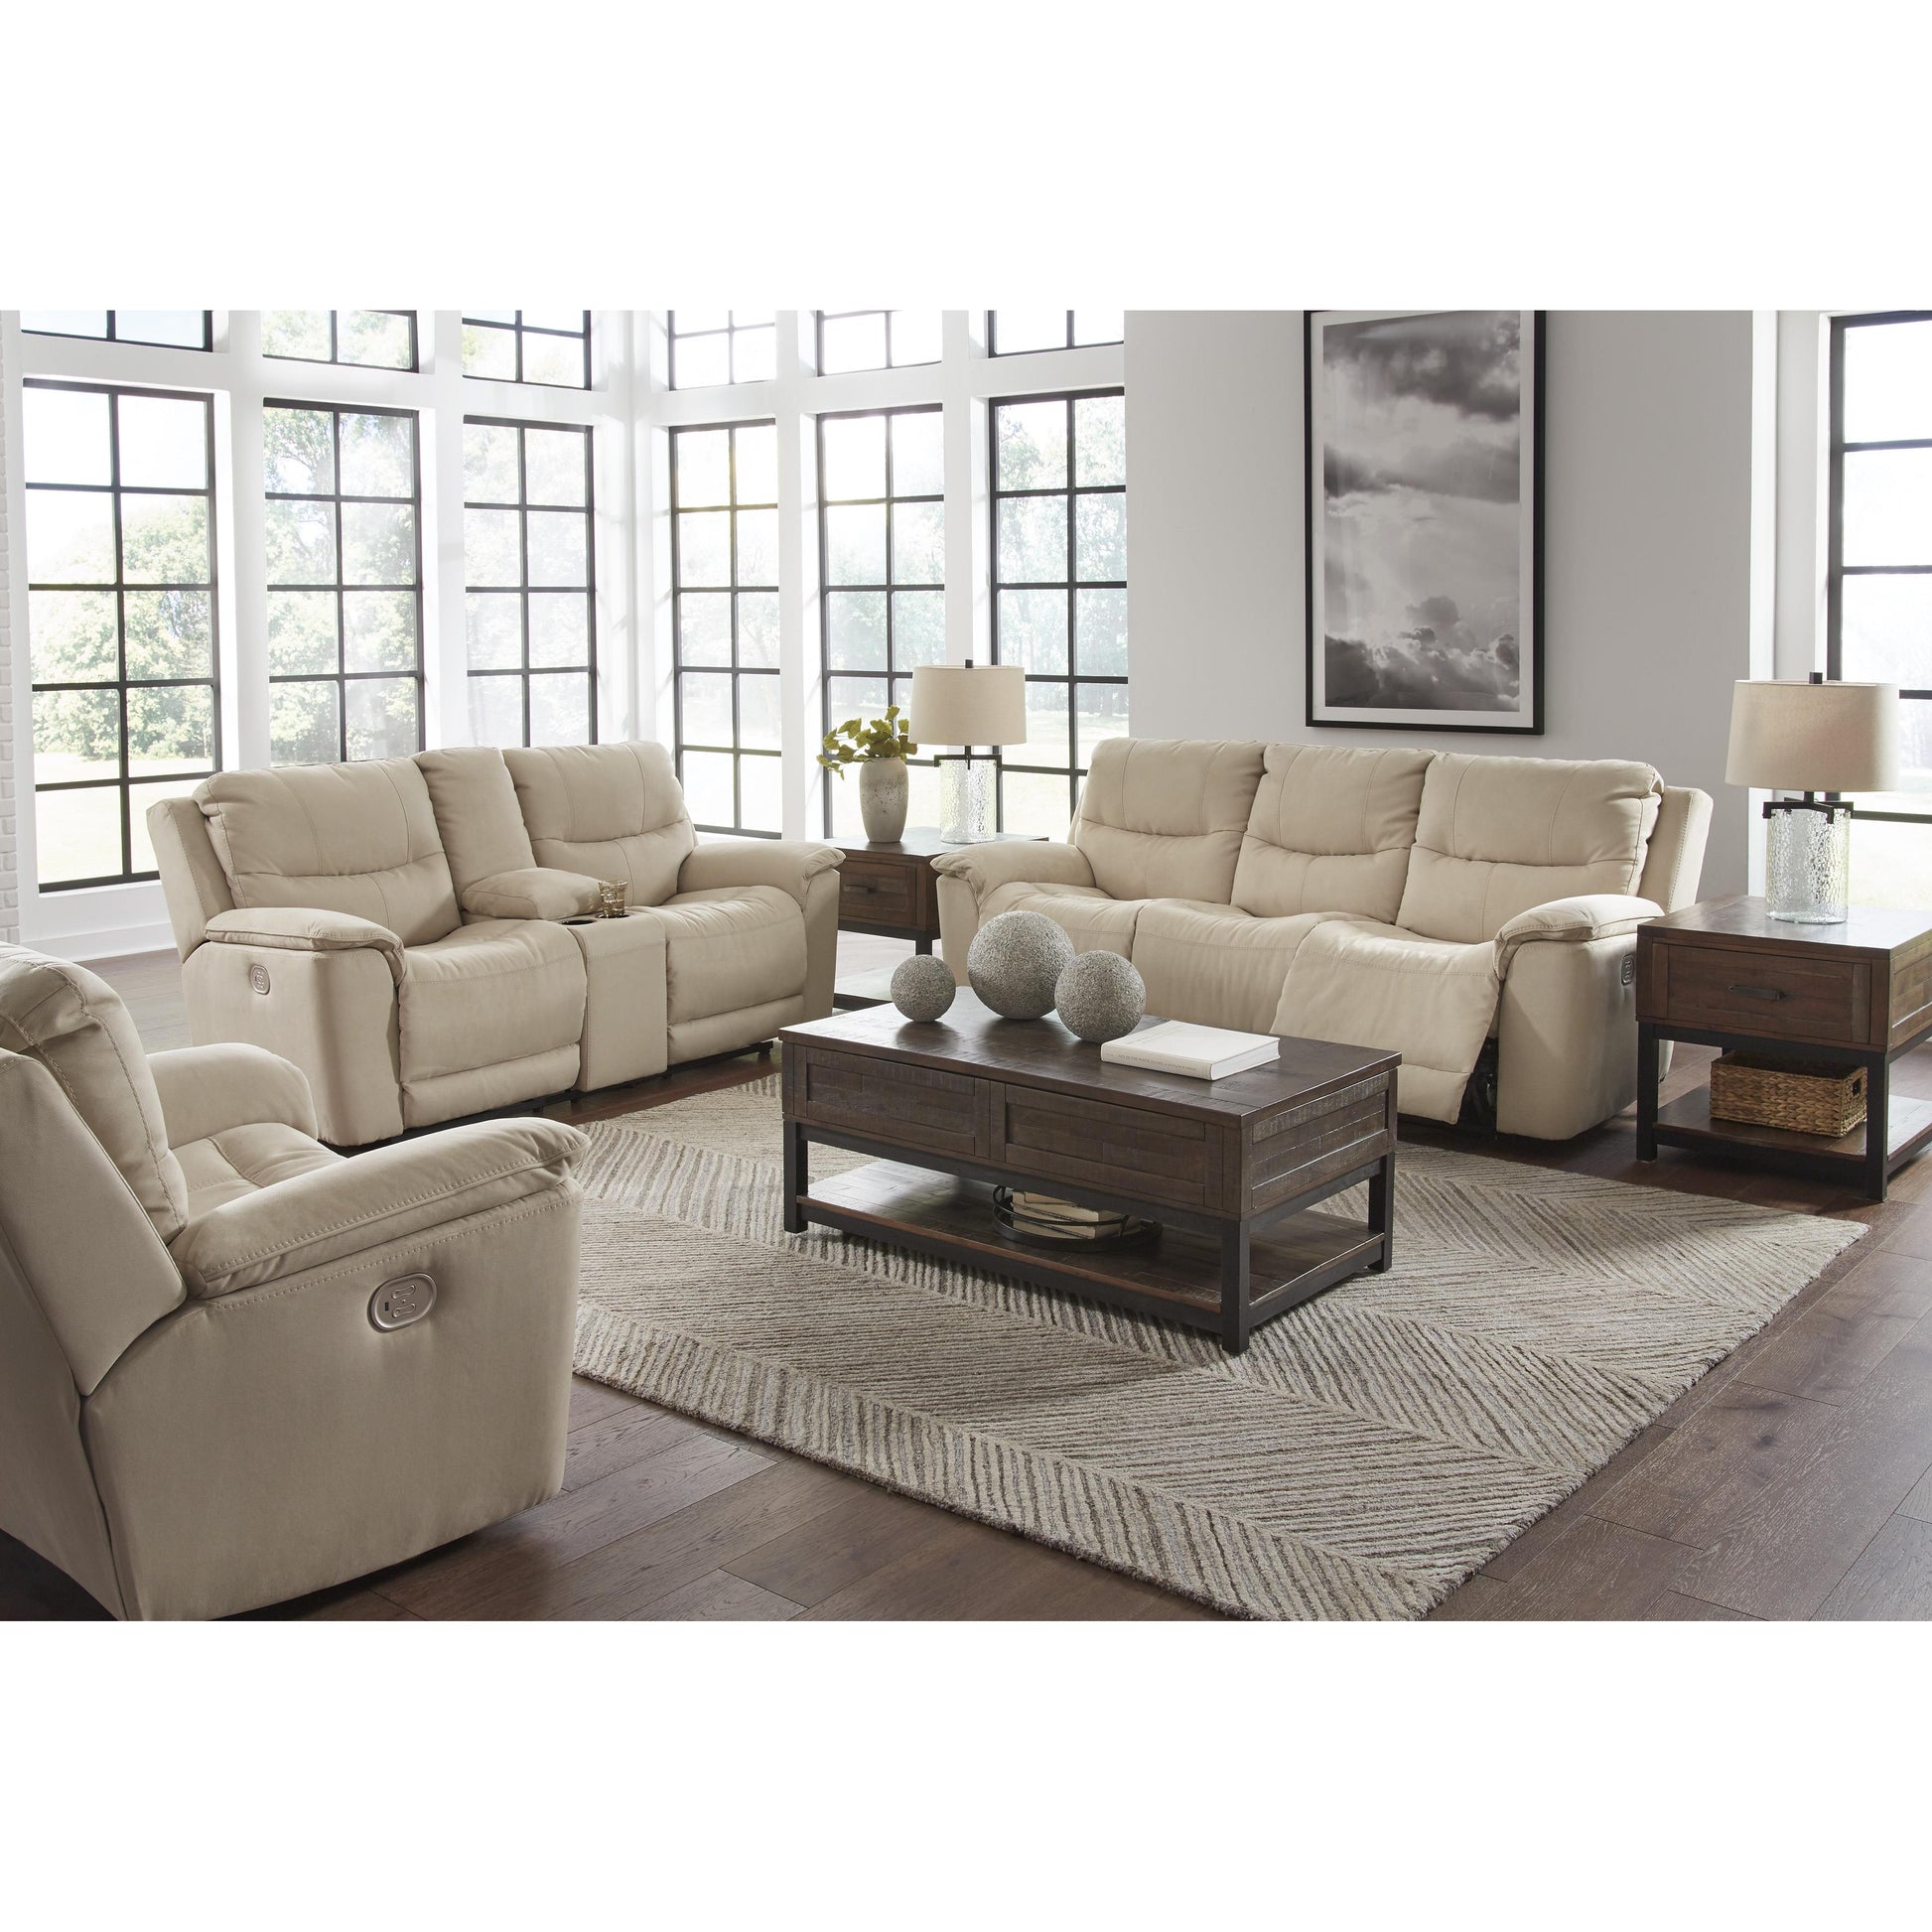 Signature Design by Ashley Next-Gen Gaucho Power Reclining Leather Look Loveseat 6080718 IMAGE 12